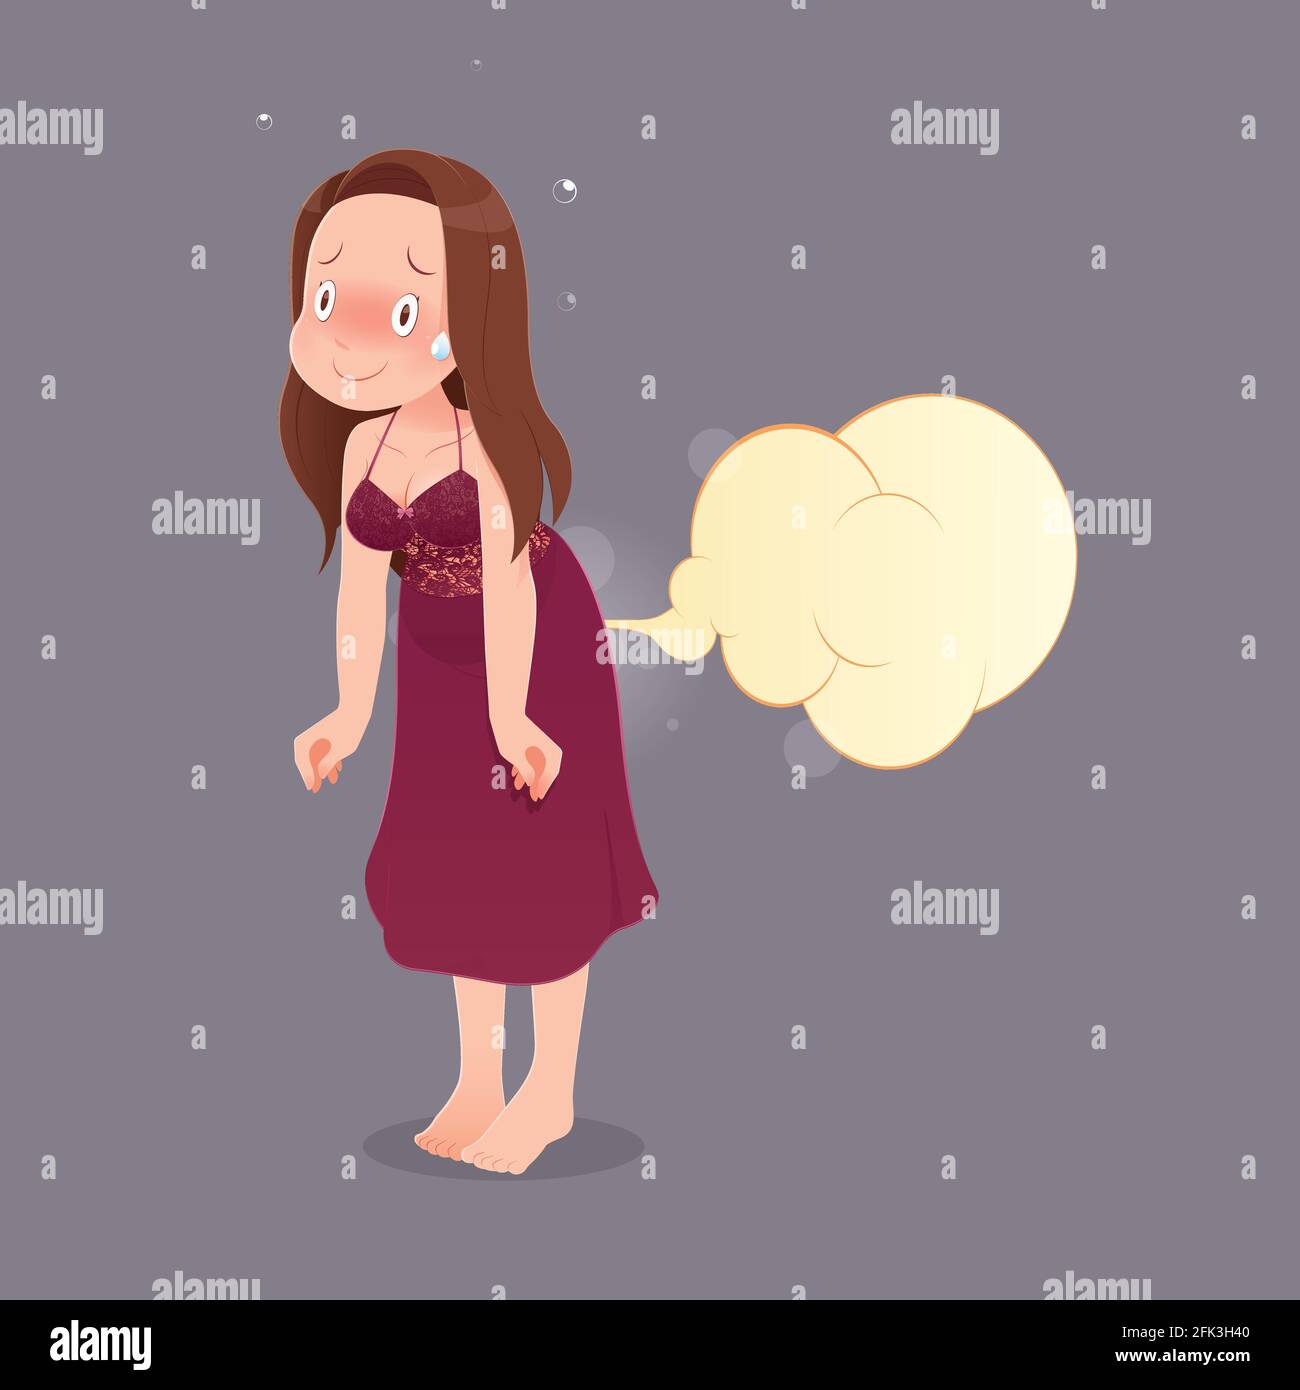 Cute Woman In Red Nightgown Farting With Blank Balloon Out From Her Bottom Against Gray 